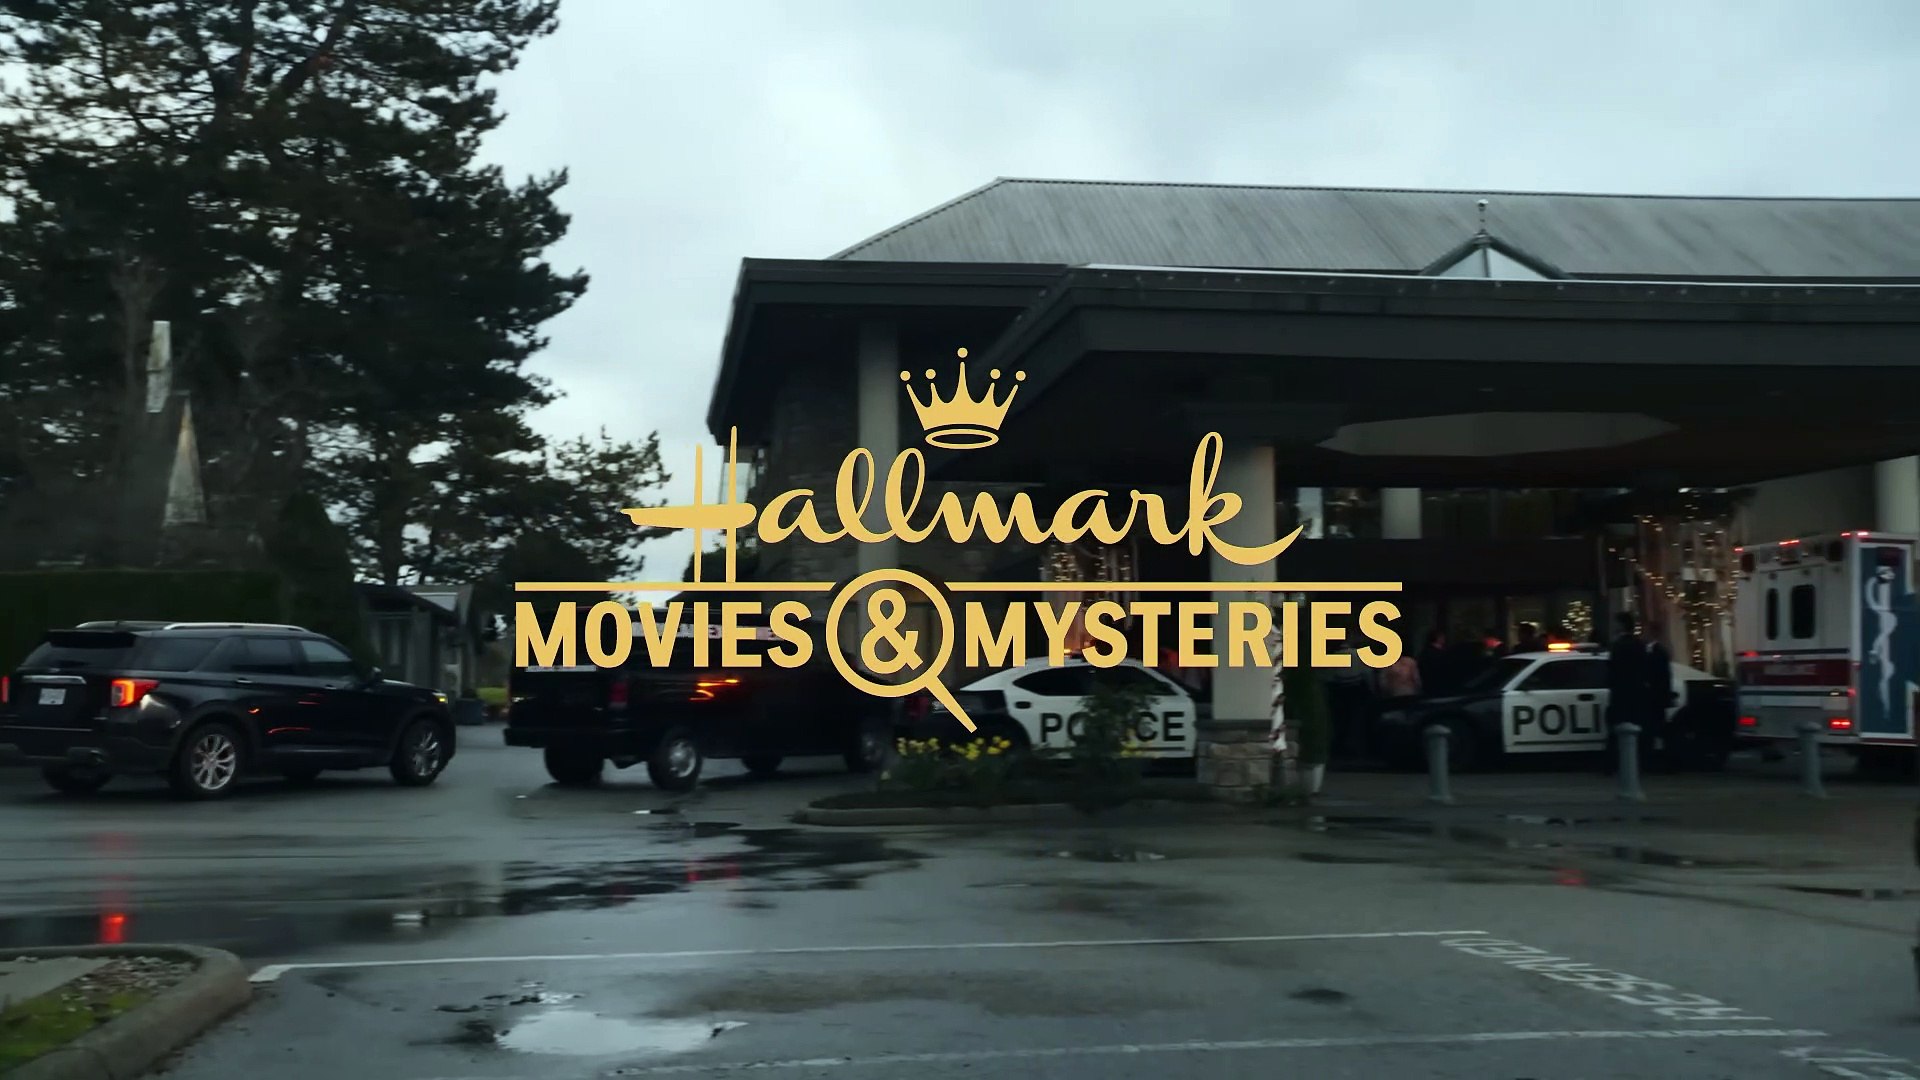 Curious Caterer: Fatal Vows - Hallmark Movies & Mysteries Movie